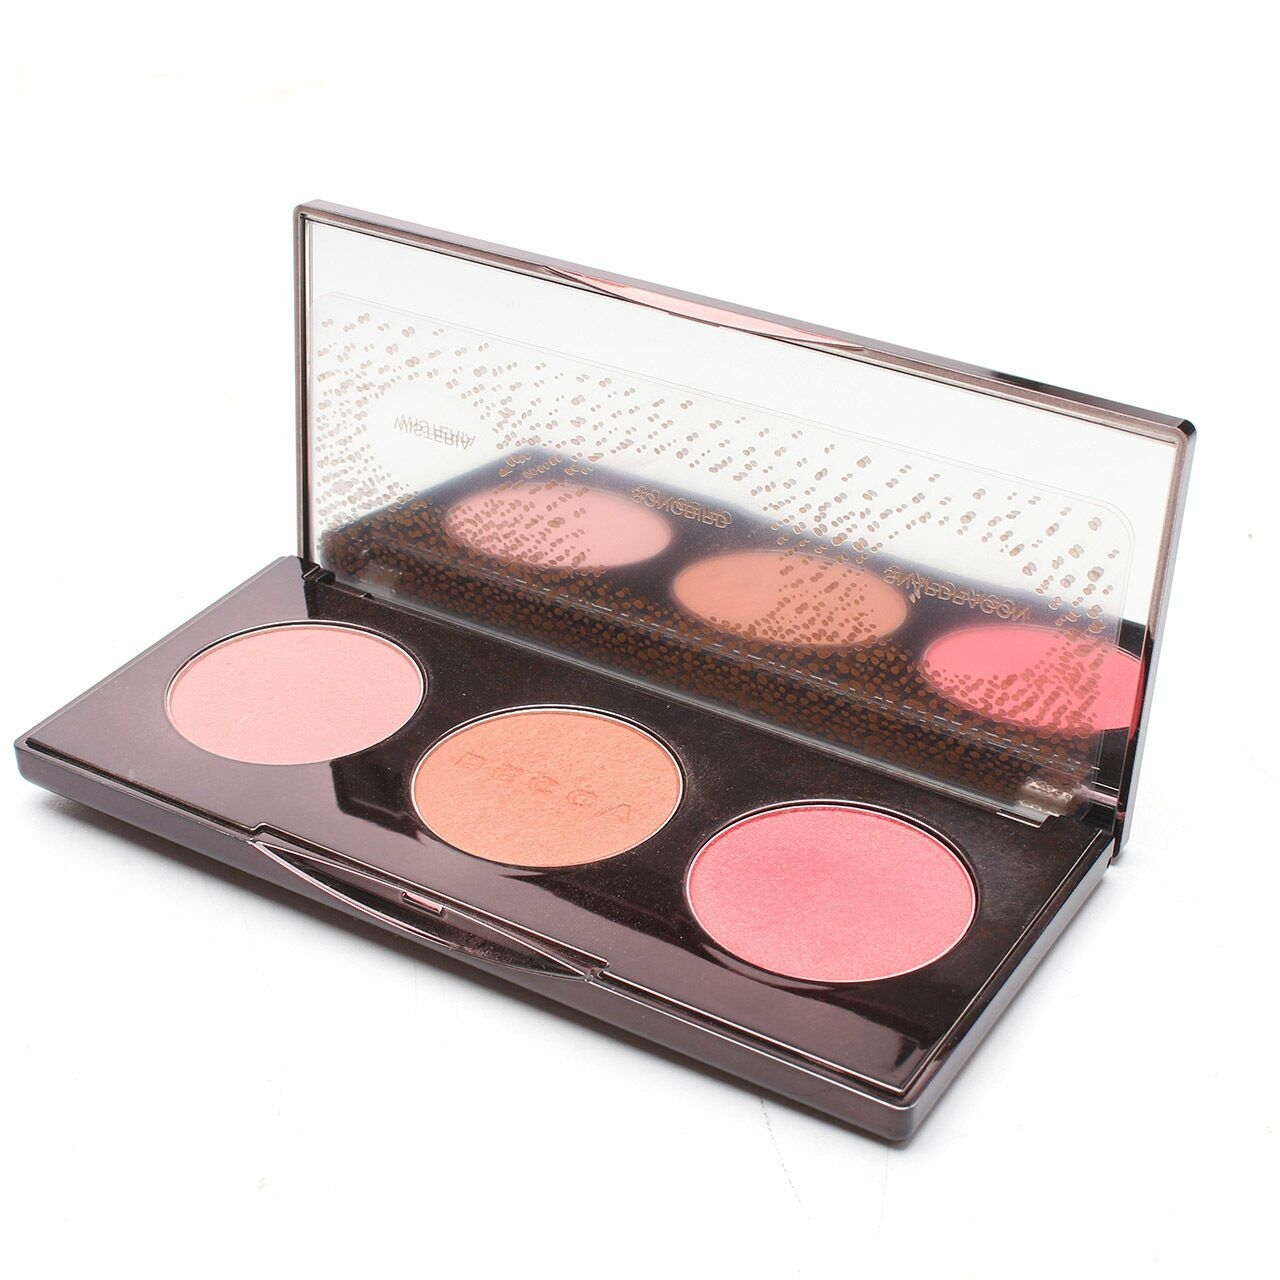 Becca Blush with Light Trio Palette Sets and Palette